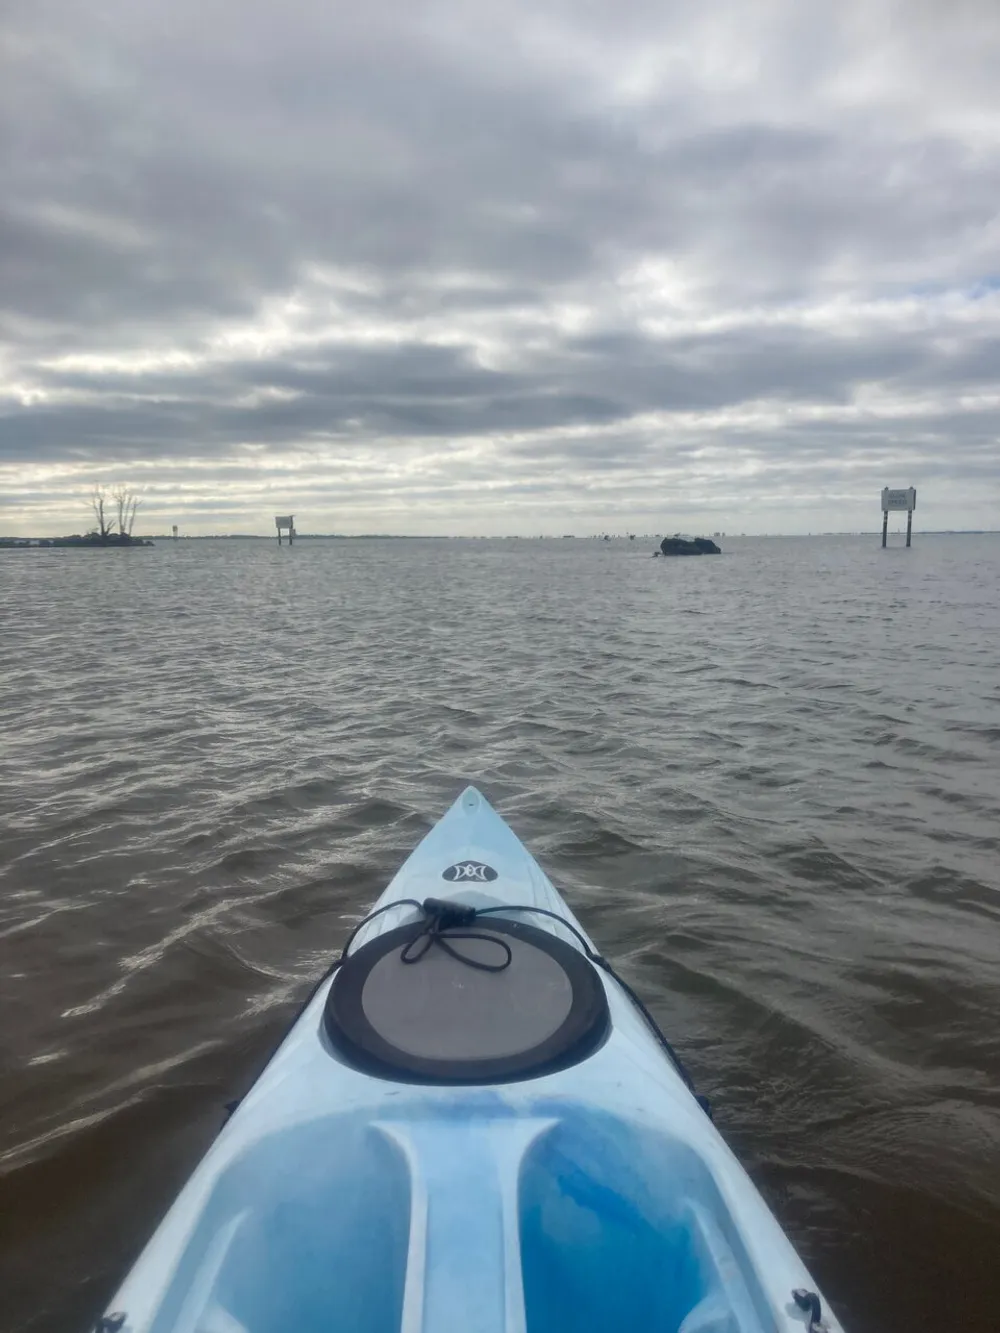 A person is kayaking on a cloudy day with the bow of their blue kayak pointing towards a distant shoreline and navigational signs over open water